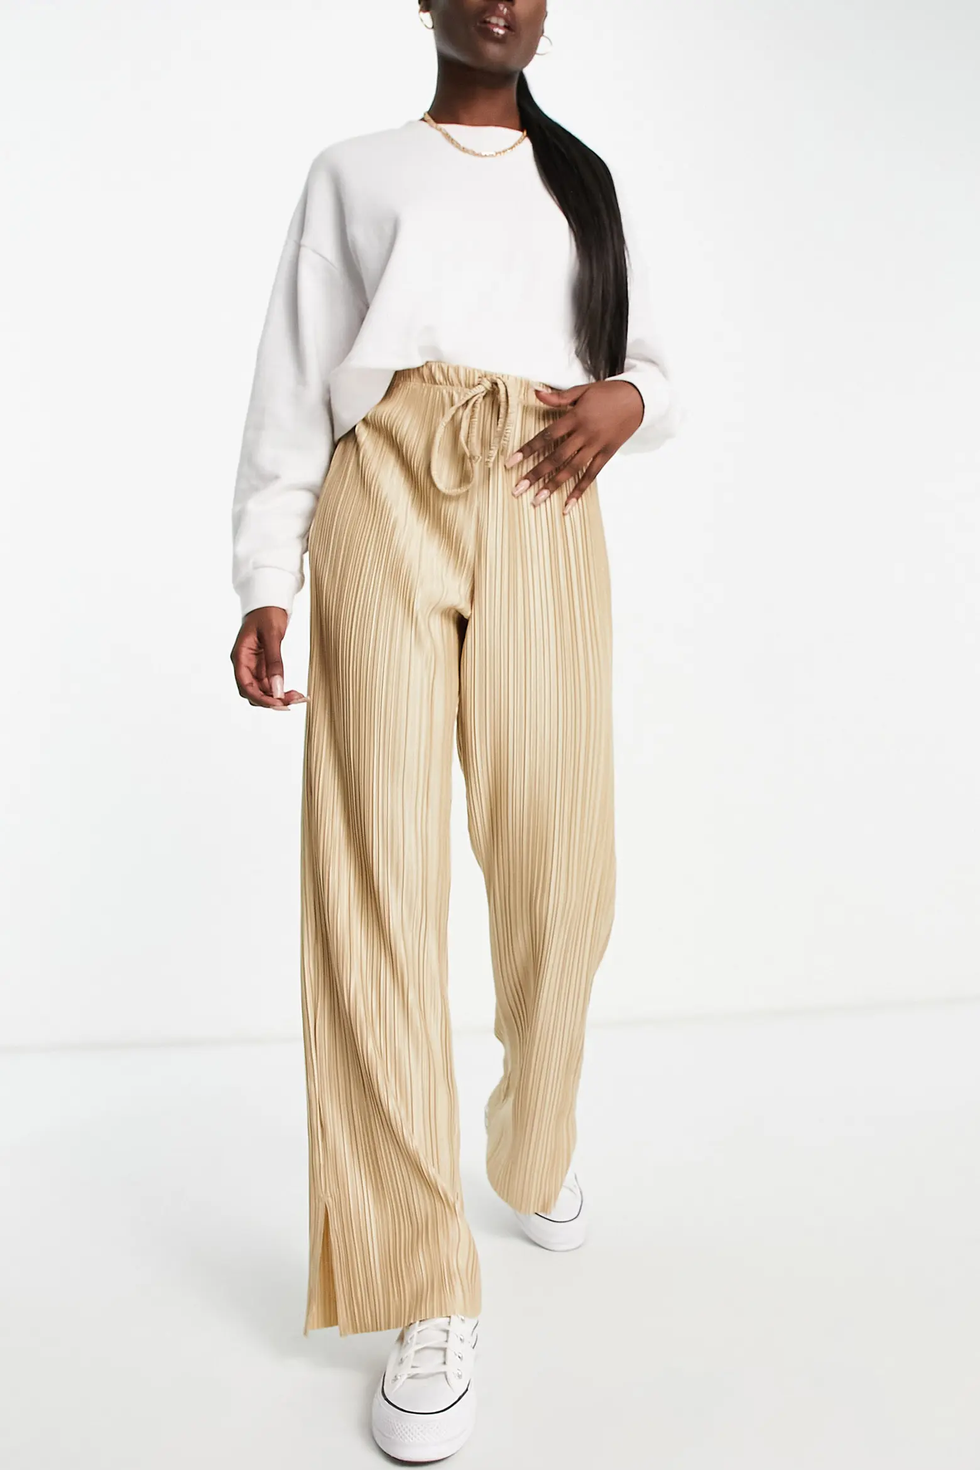 Lightweight Pants Styles that are Perfect for Summer - Madison to